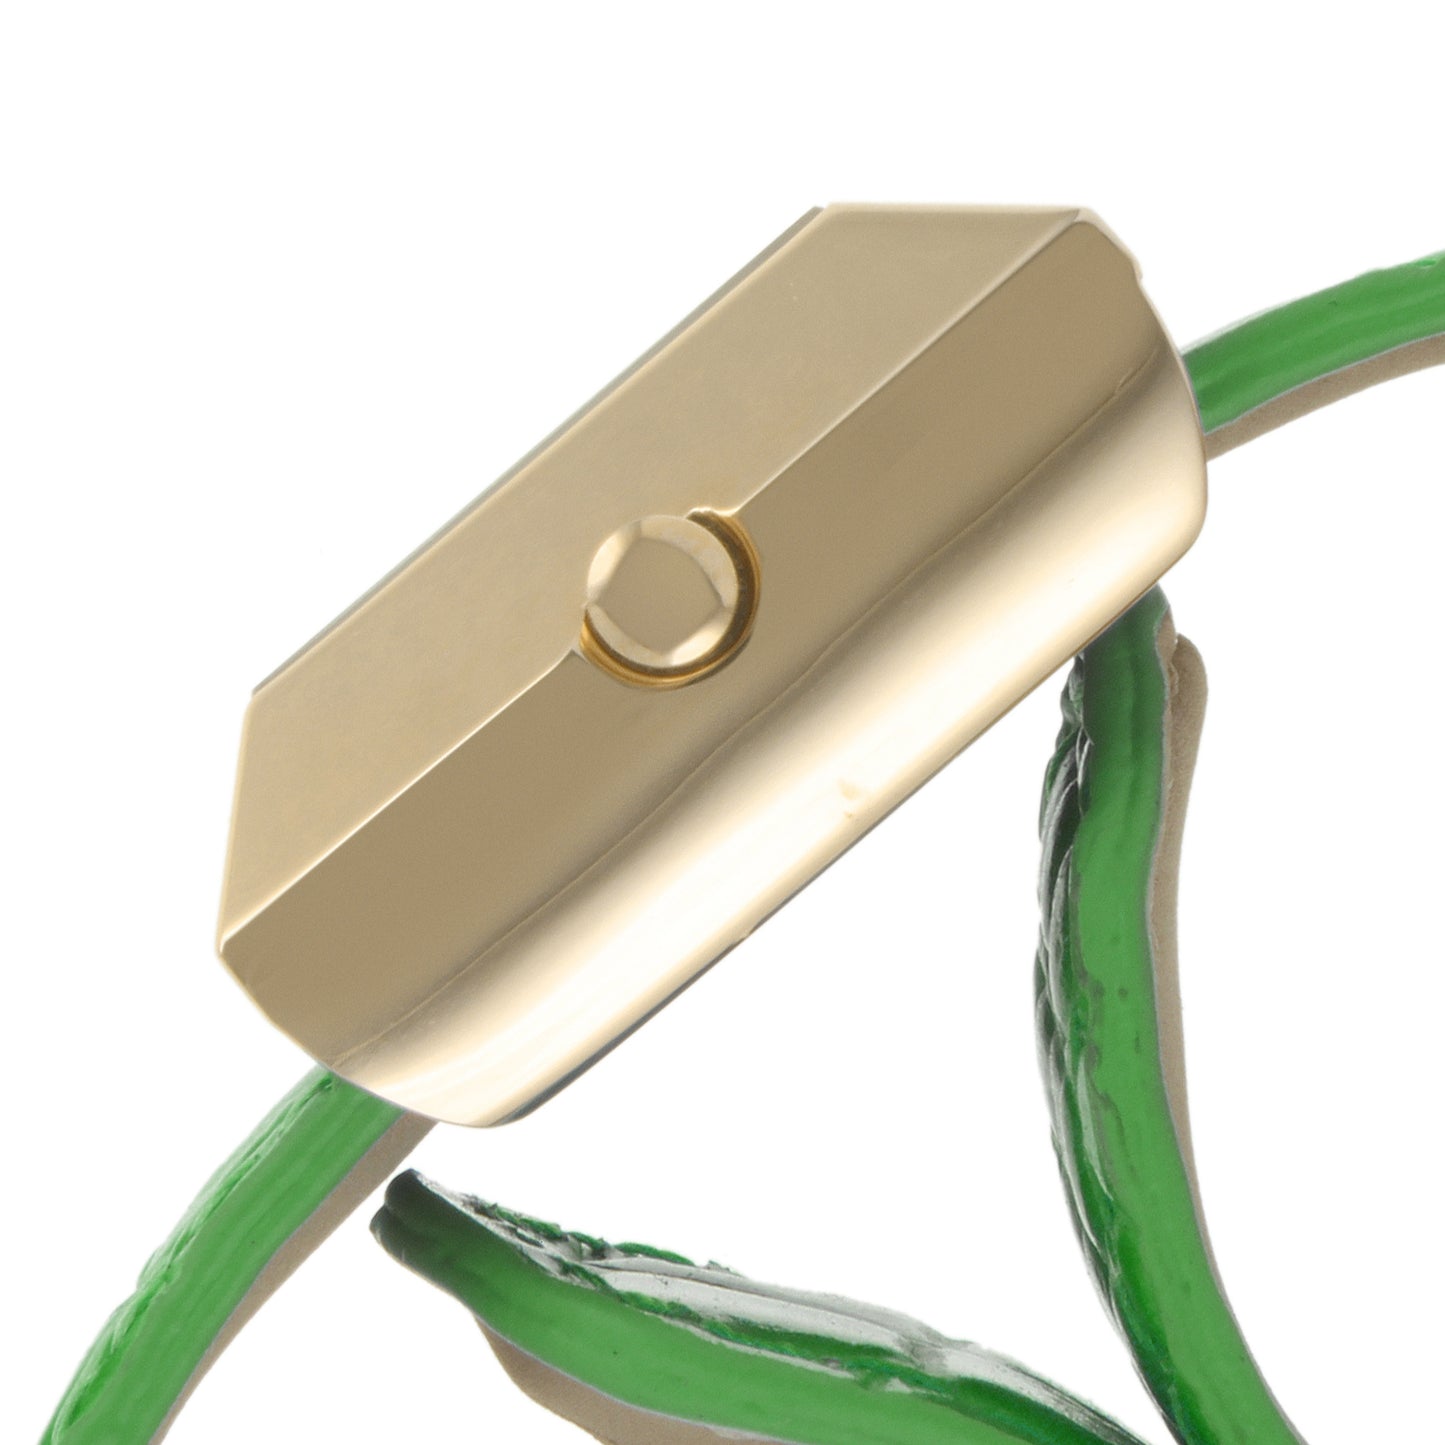 TKO Metal Slapper with Leather Band - Green/Gold